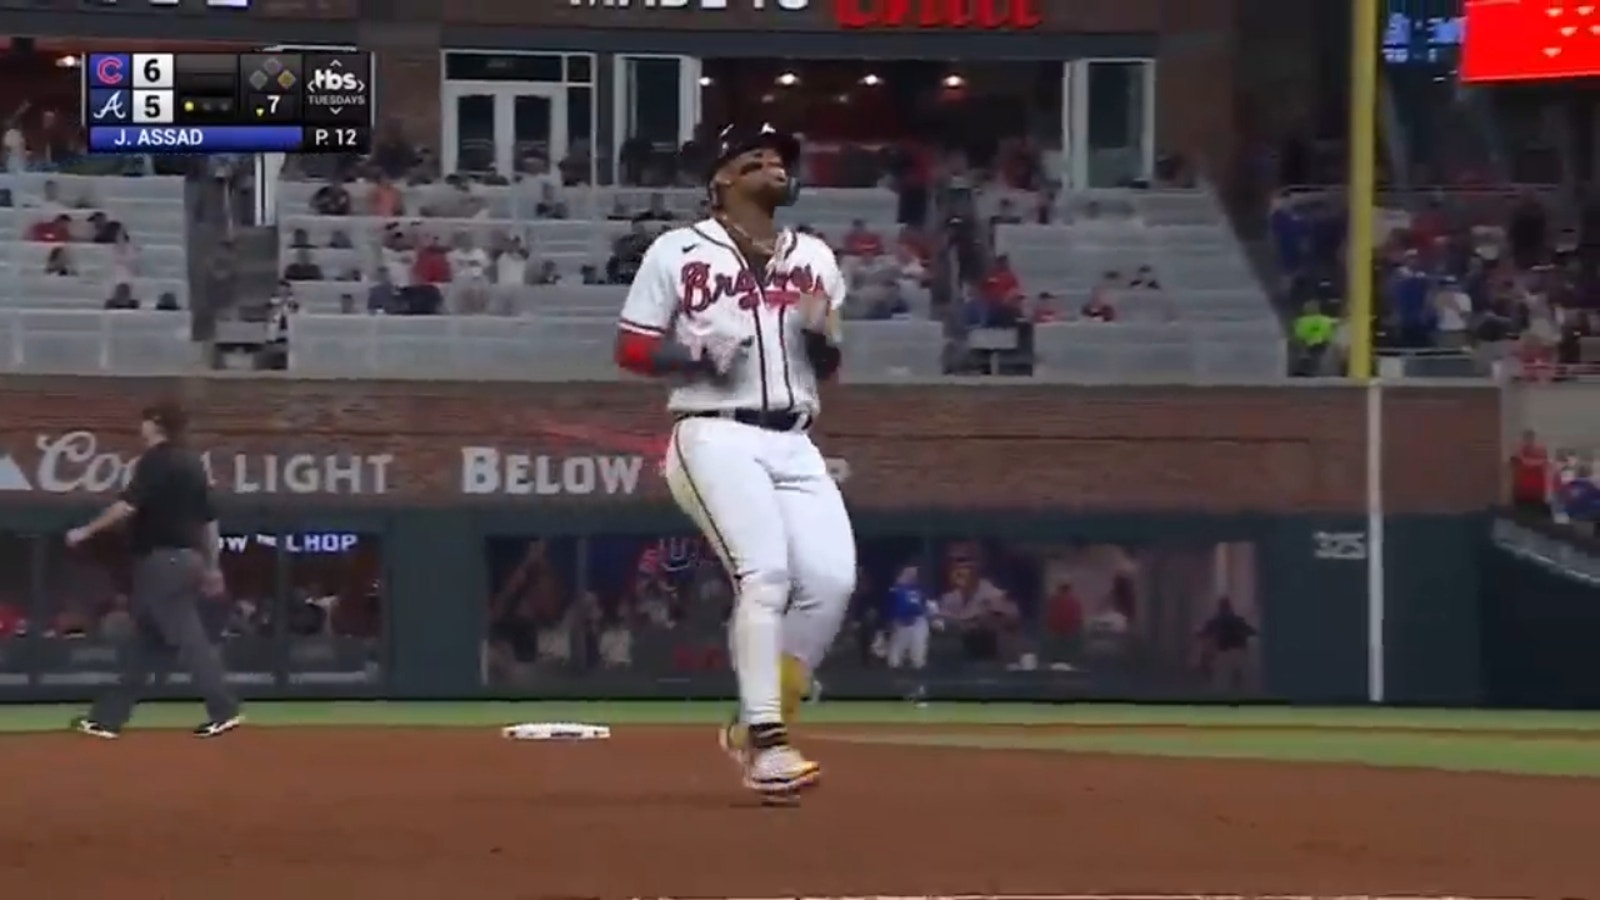 Highlights from Braves' 7-6 comeback win over Cubs